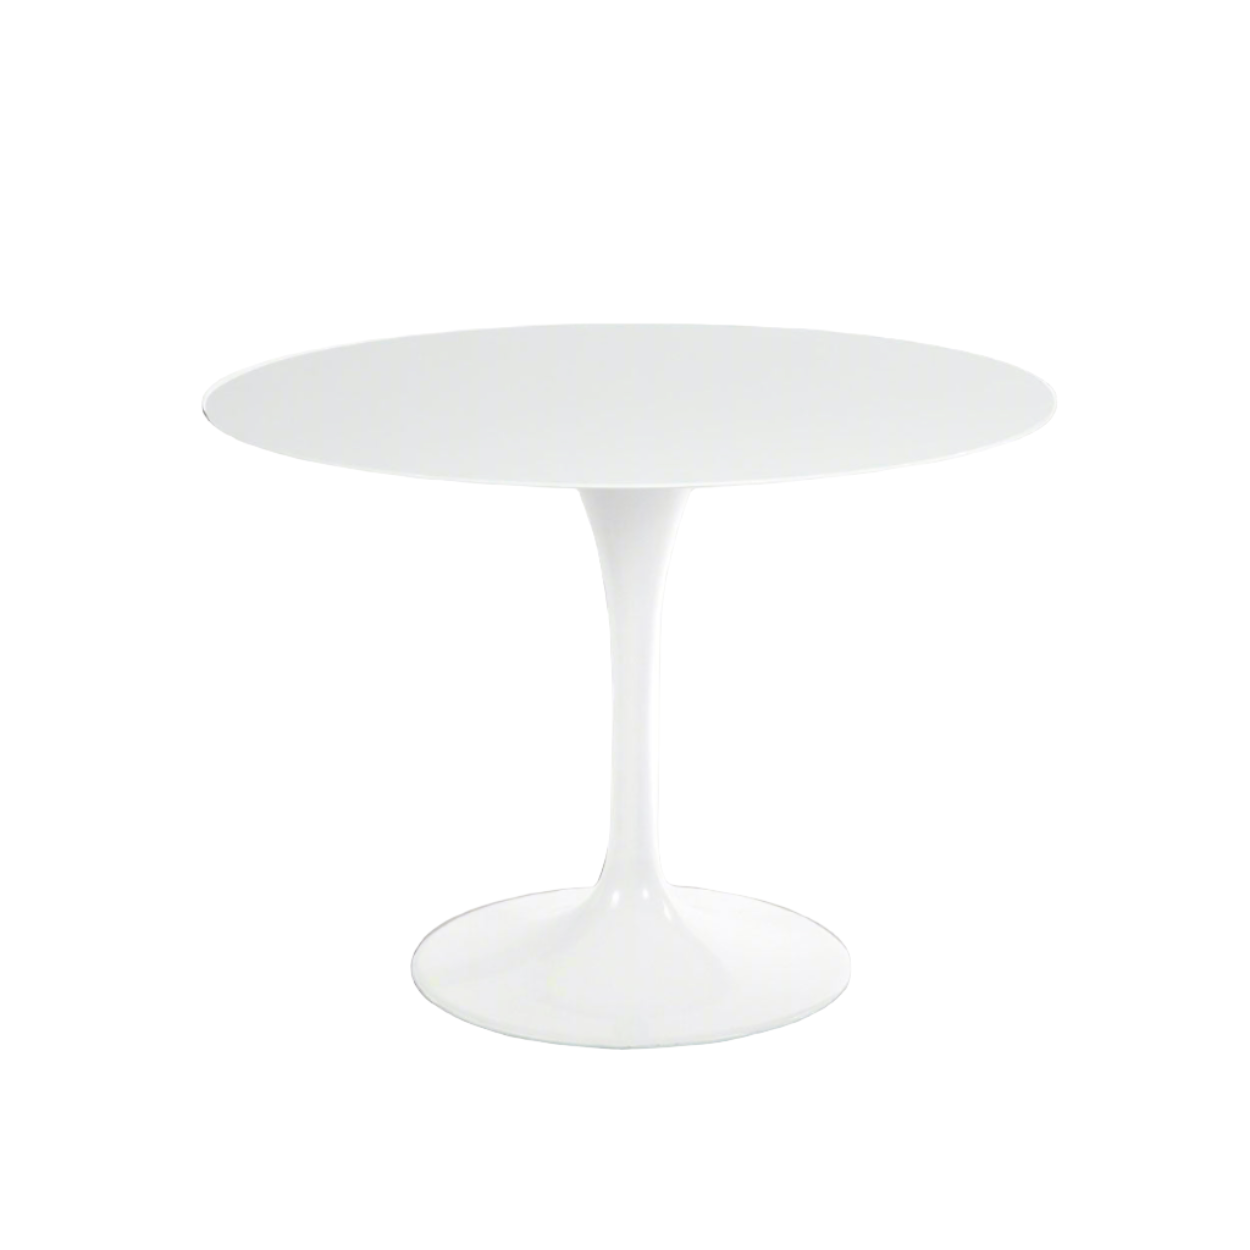 White Lacquer Tulip Dining Table - Round